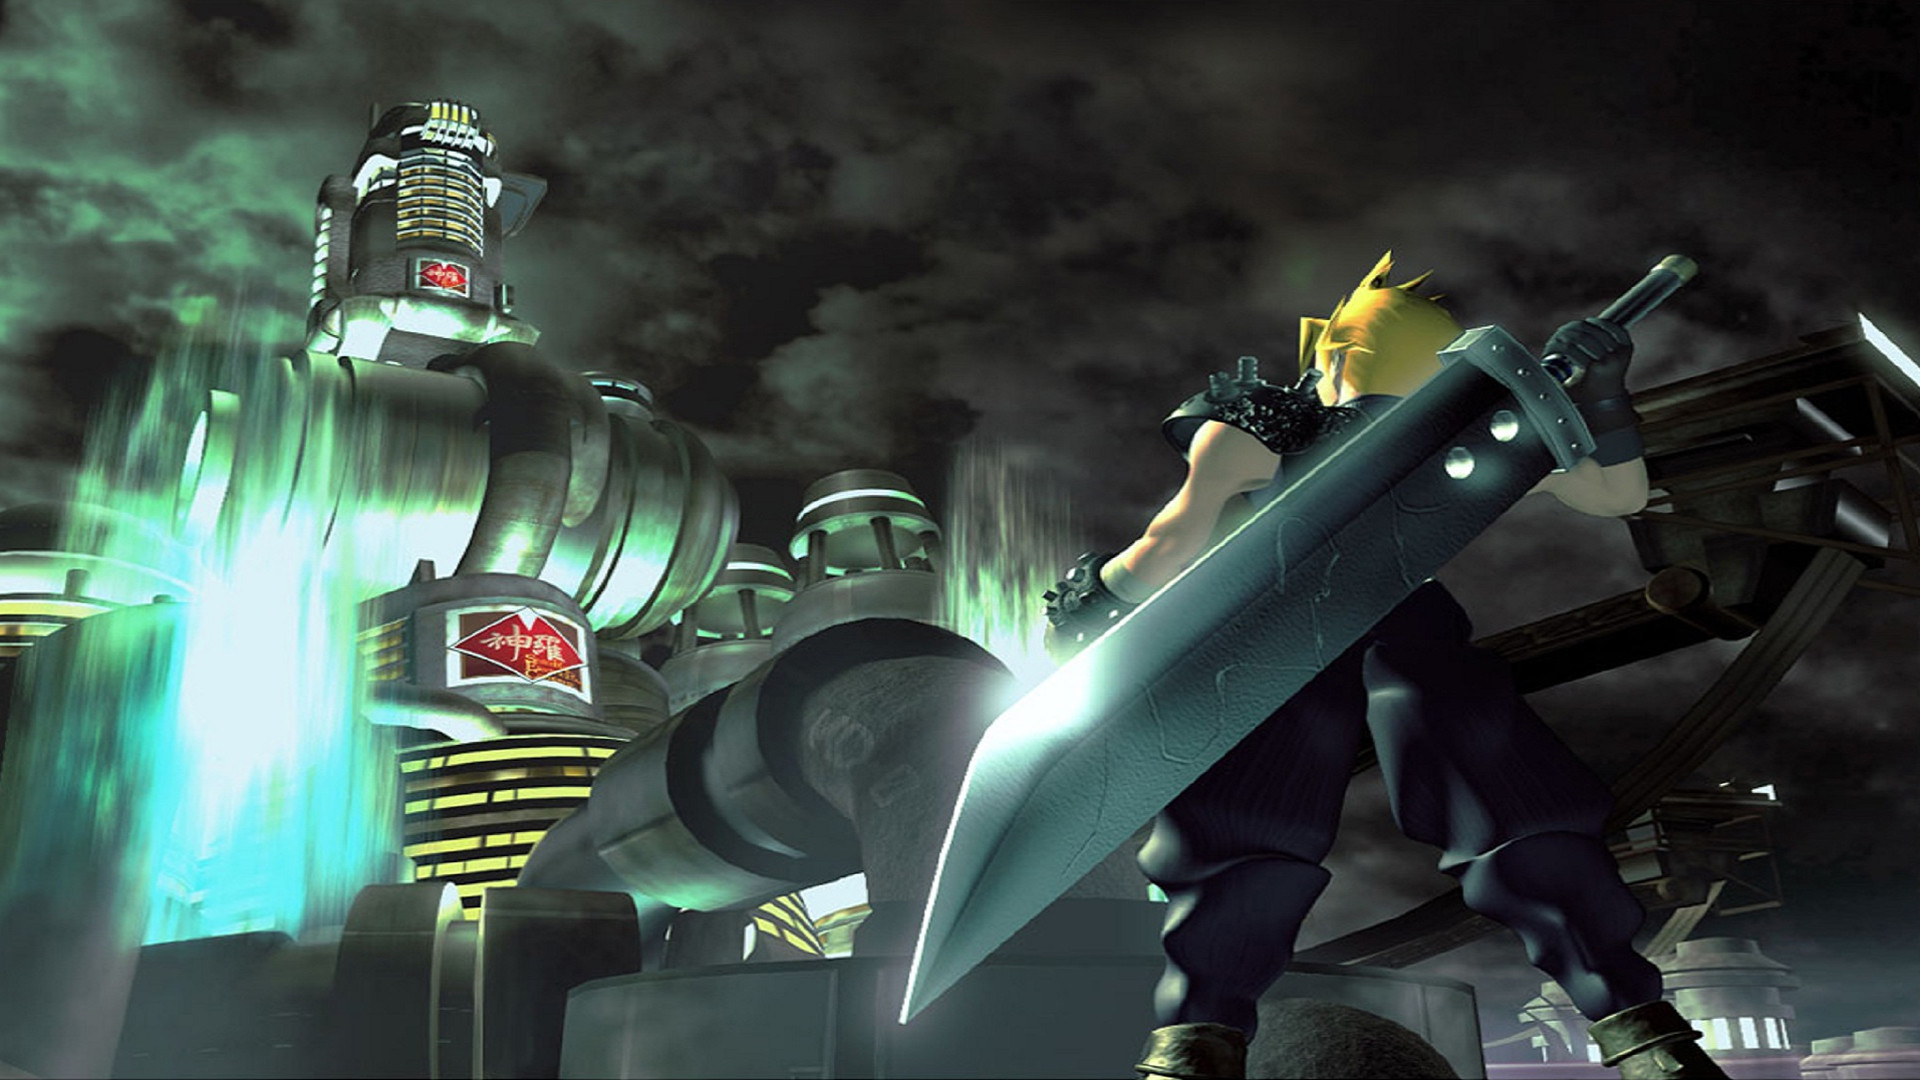 Retro Graded Games: Final Fantasy VII. The Young Folks